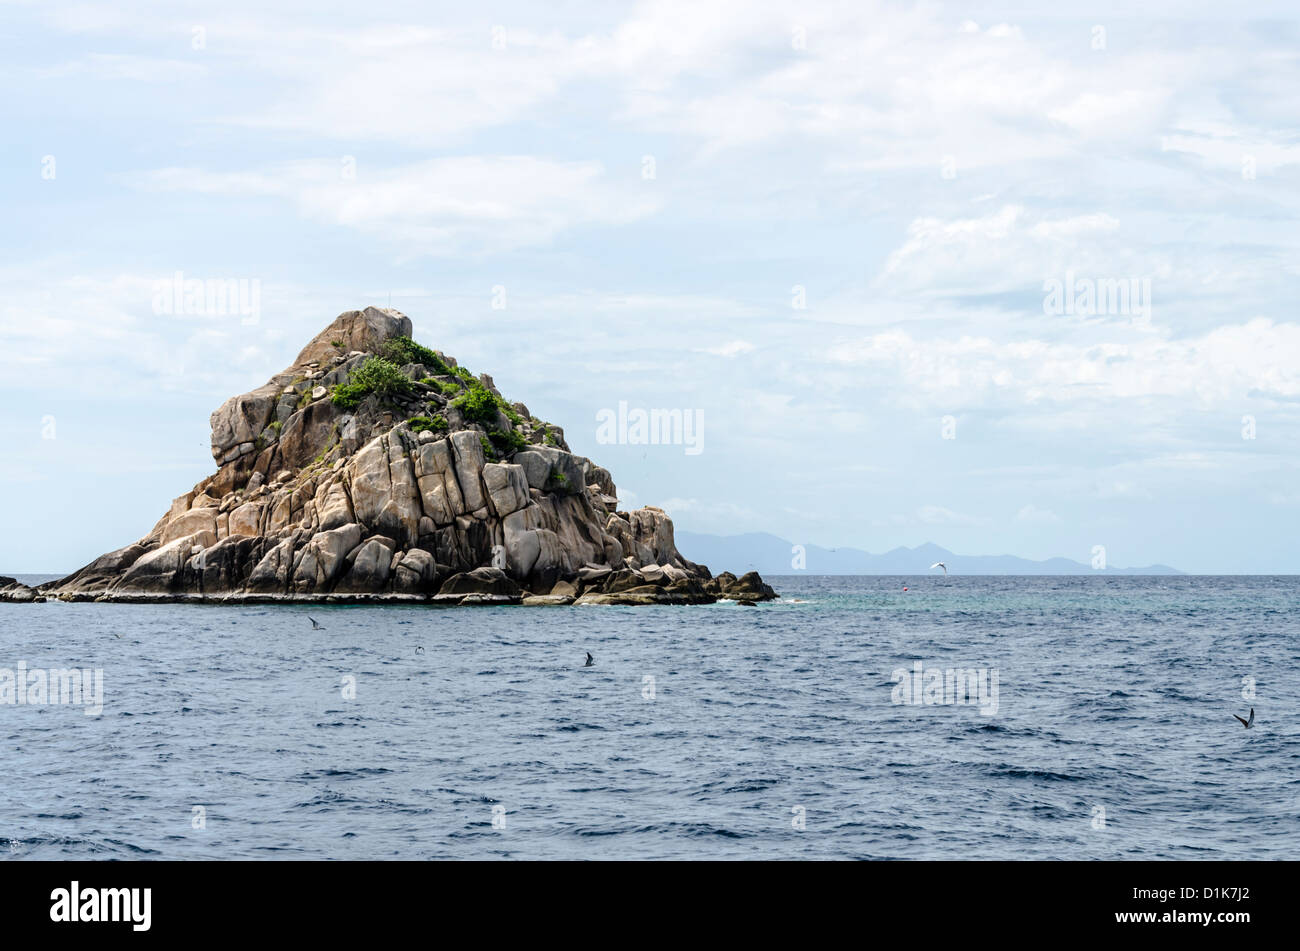 Small rocky island with large boulders up close in sunshine and Koh Pha-Ngan in distance in the Gulf of Thailand near Koh Tao Stock Photo